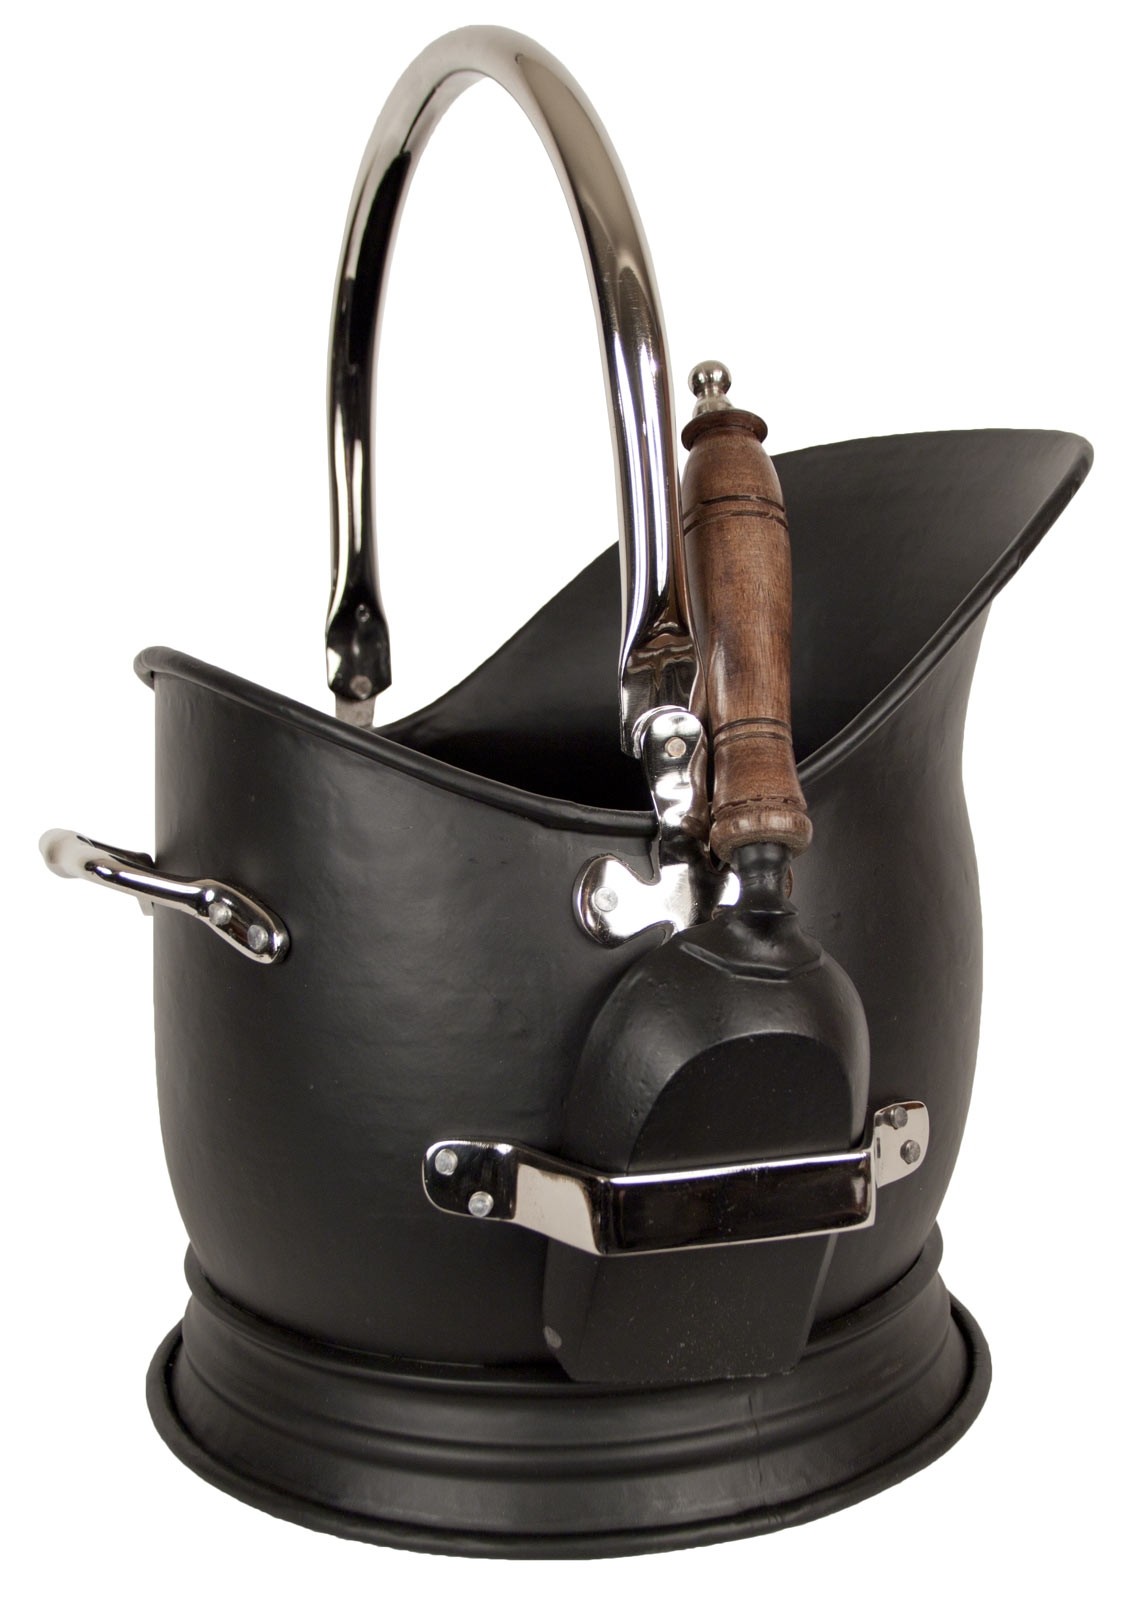 45cm Classic Heavy Duty Large Black Nickel Plated Finish Coal Scuttle Hod Bucket With Shovel